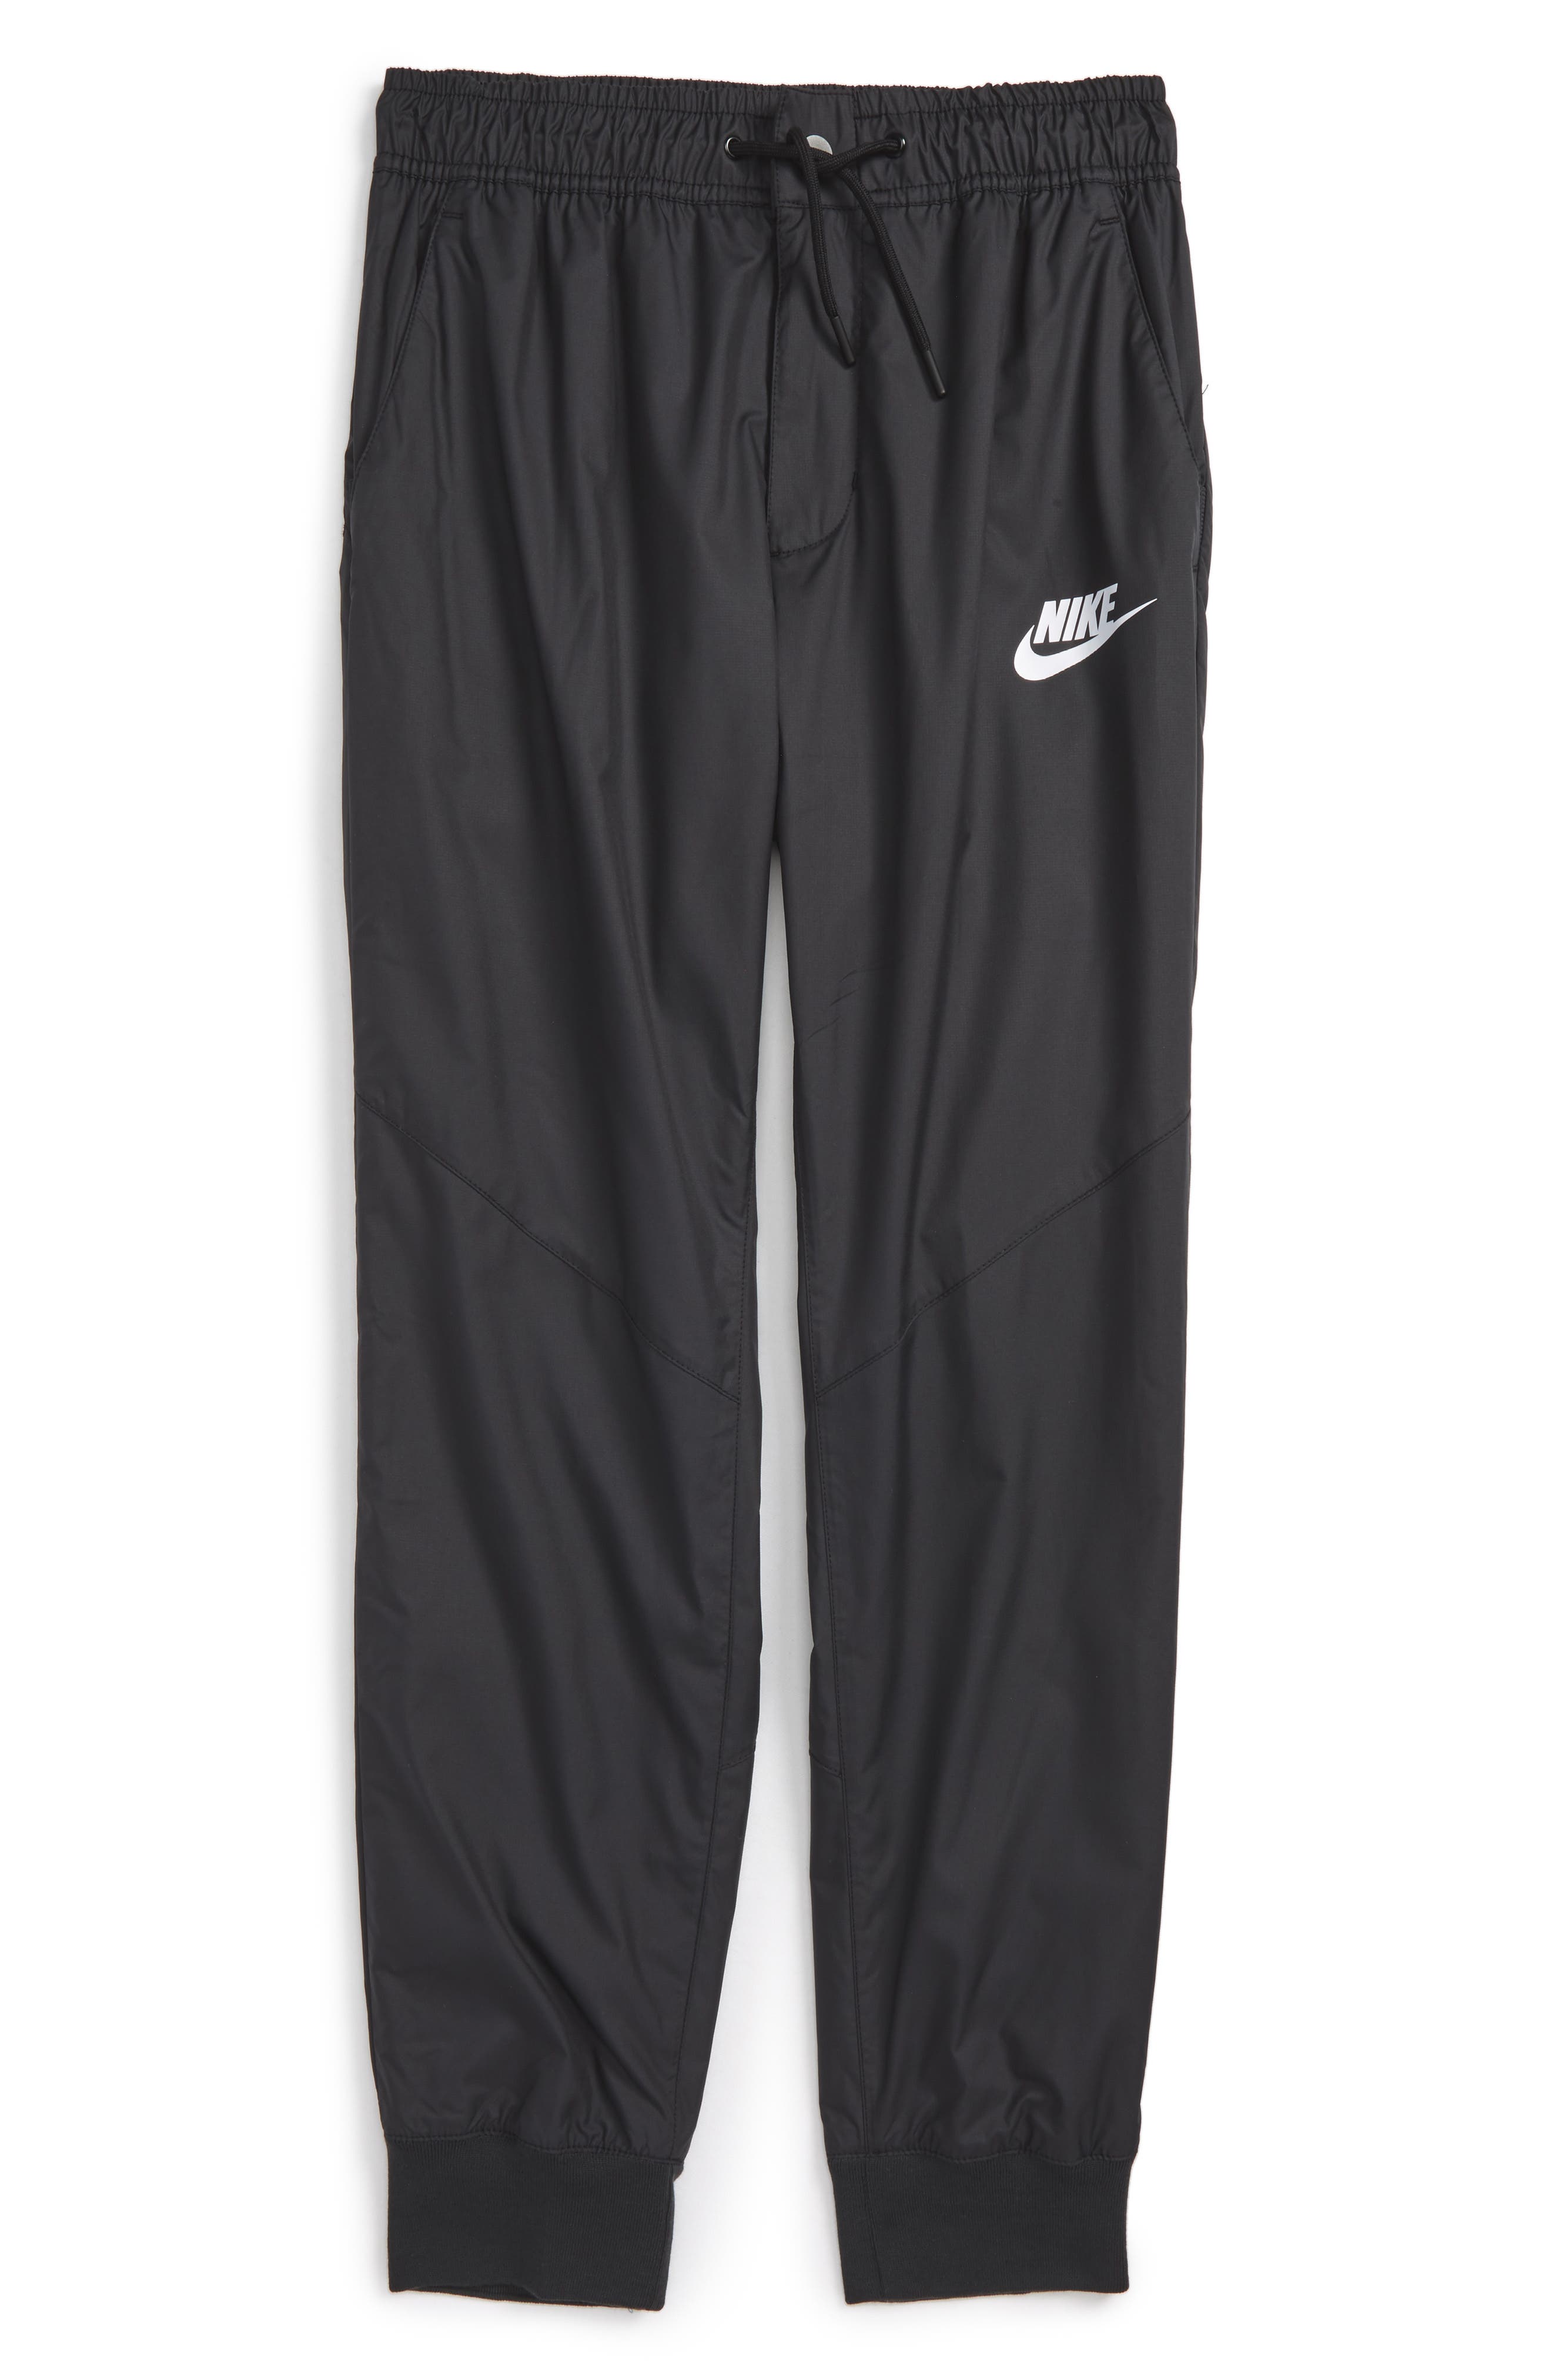 track pants with side snaps